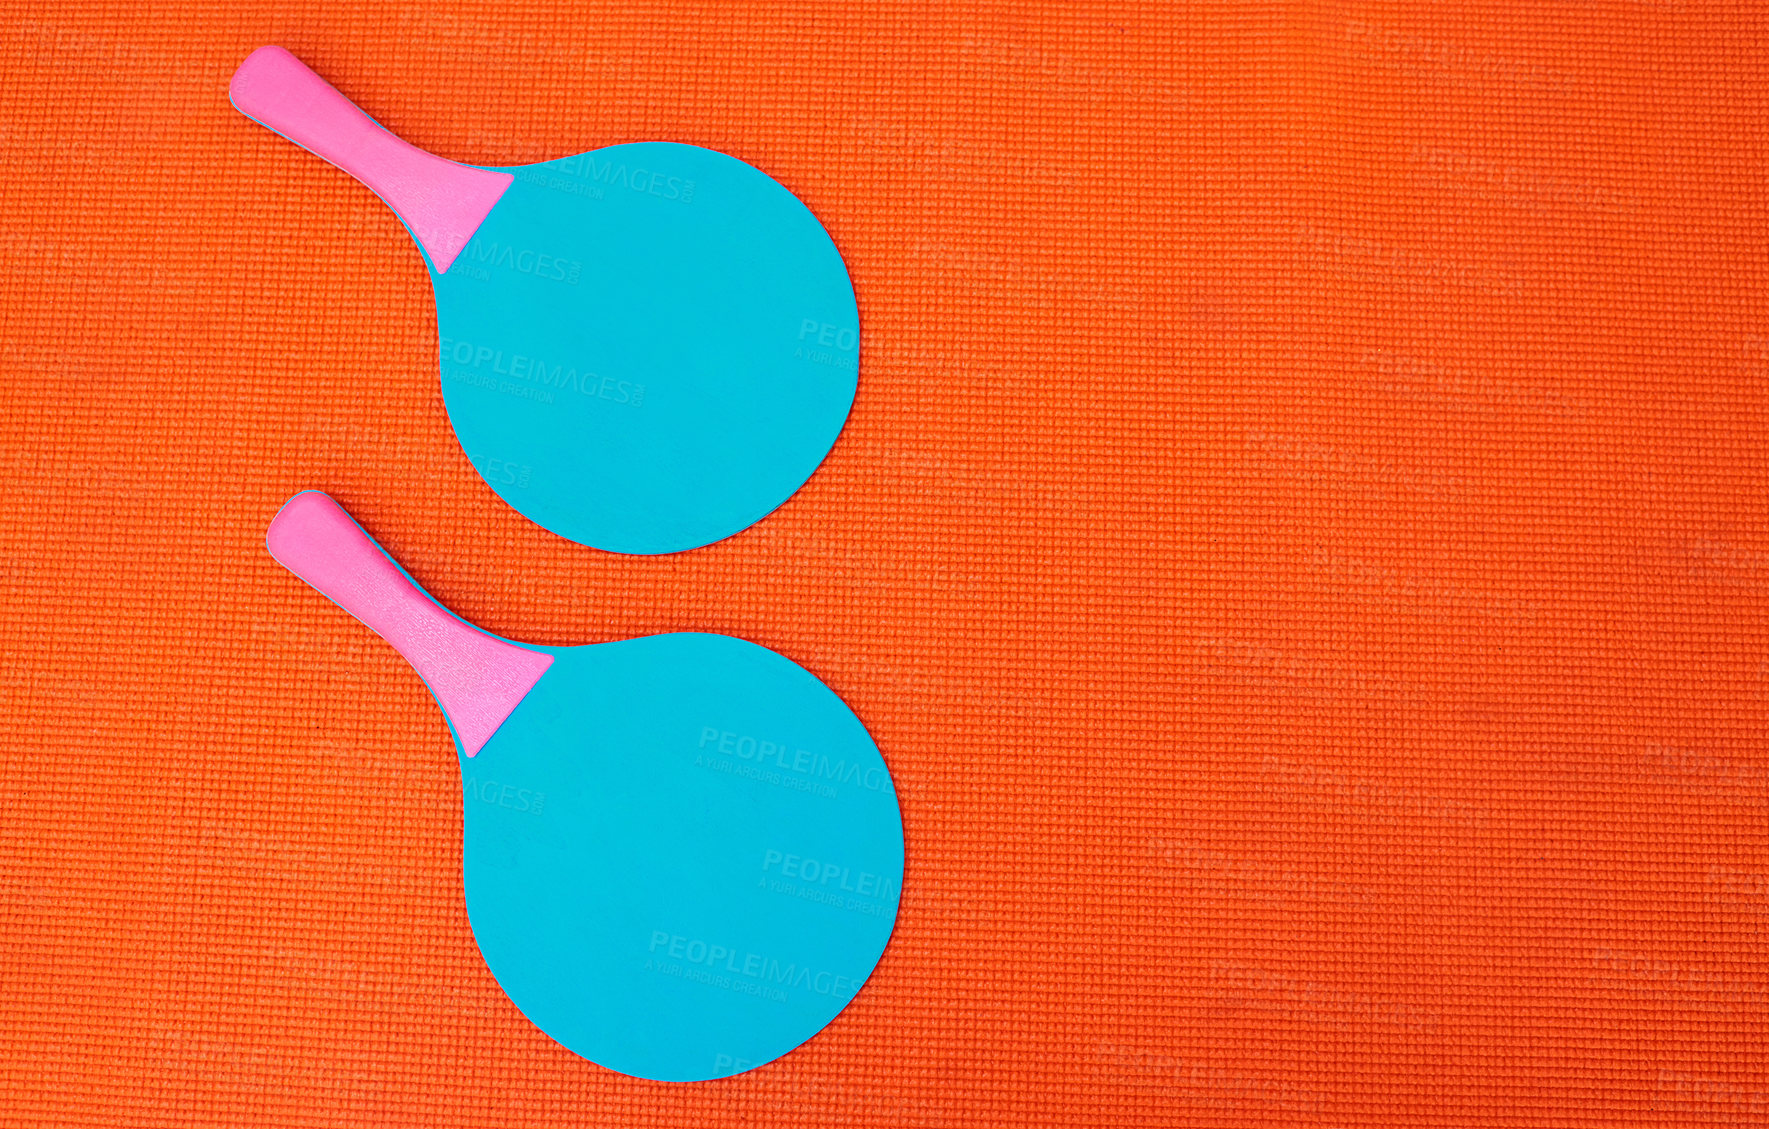 Buy stock photo High angle shot of two table tennis bats placed together on top of an orange background inside of a studio